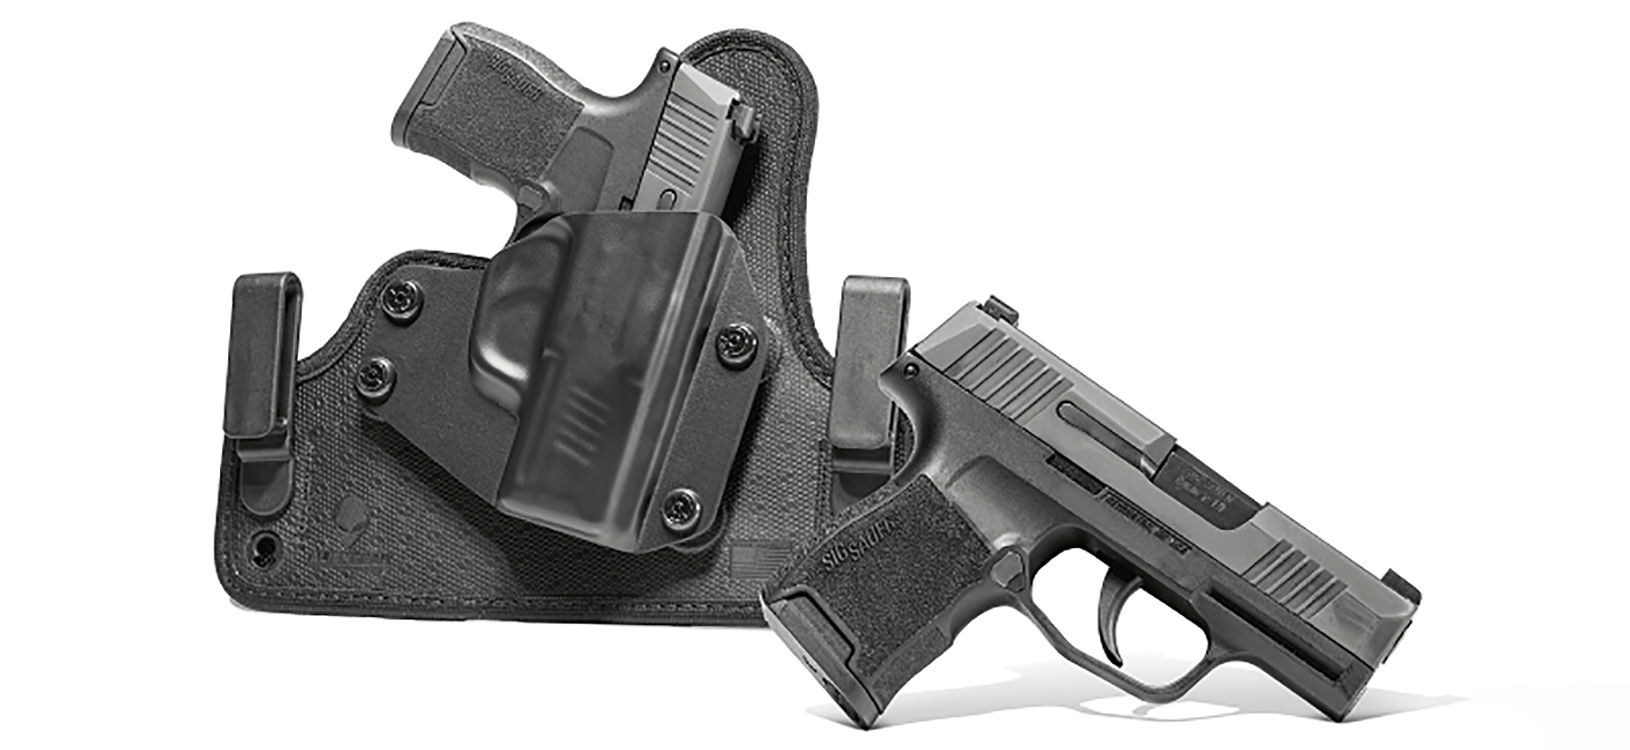 What are the Best Sig Sauer Pistols to Own?